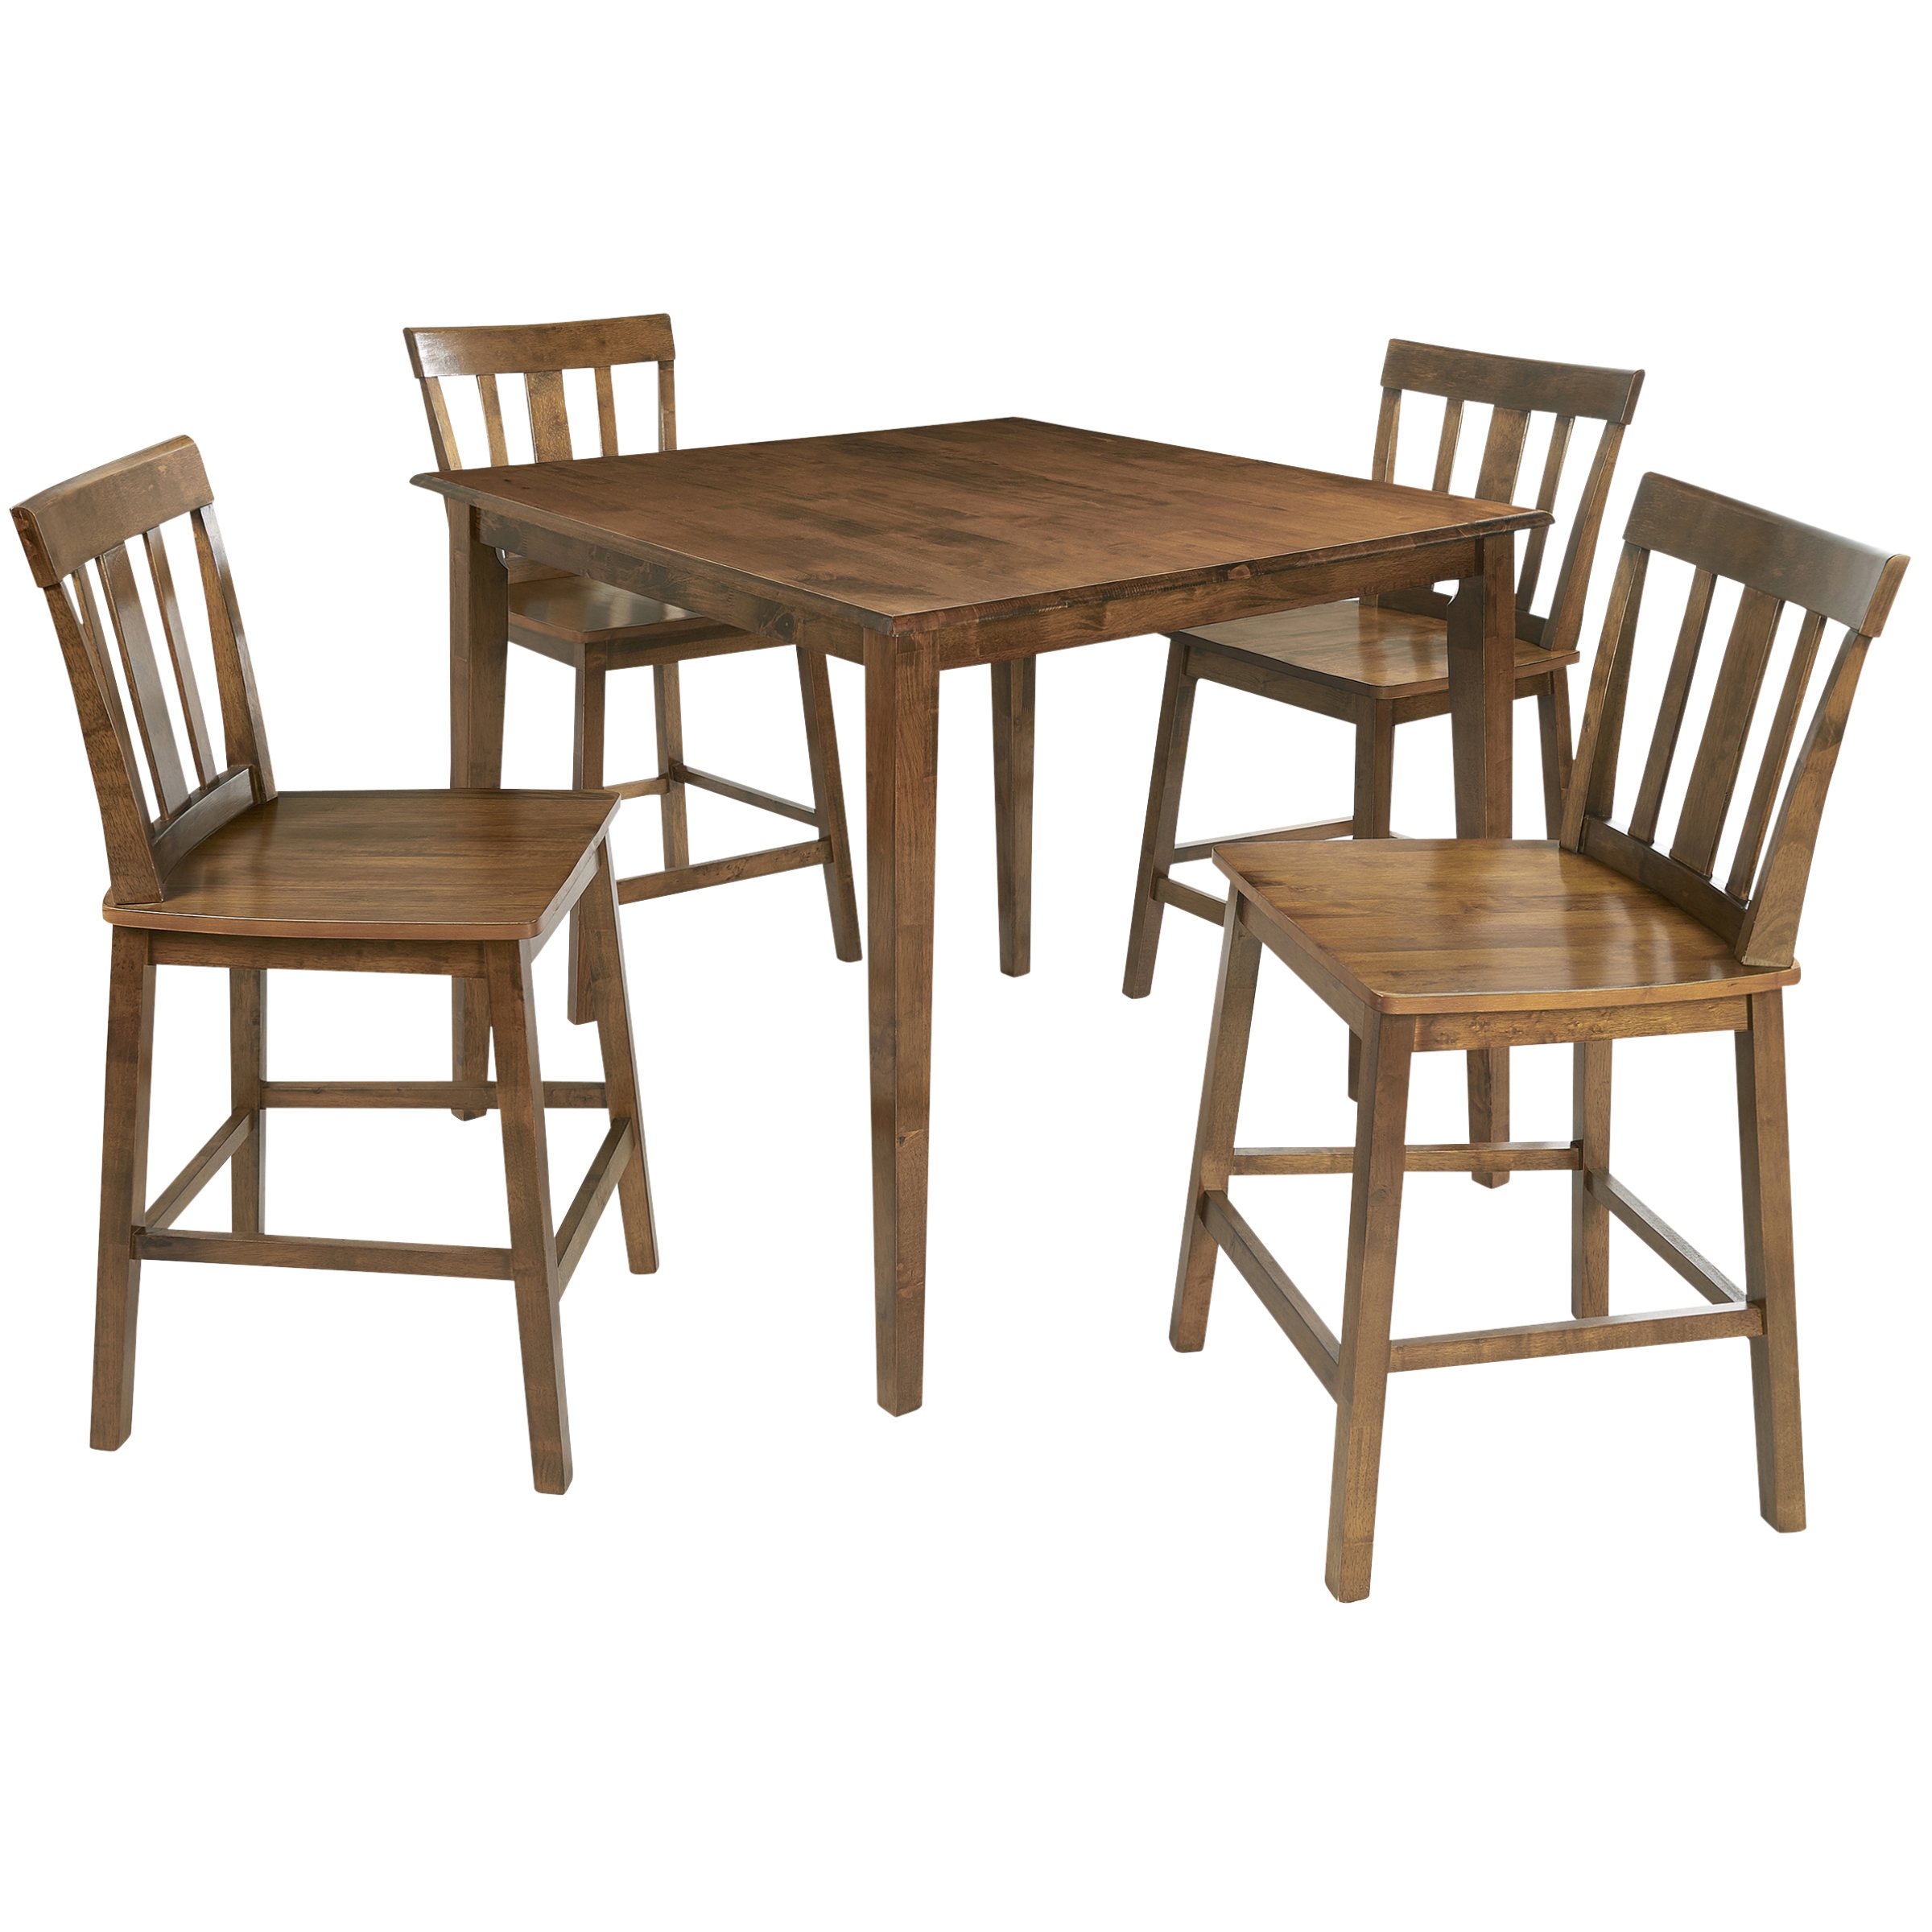 Mainstays 5 Piece Mission Counter Height Dining Set, Solid Wood, Cherry Color for Home - image 6 of 8